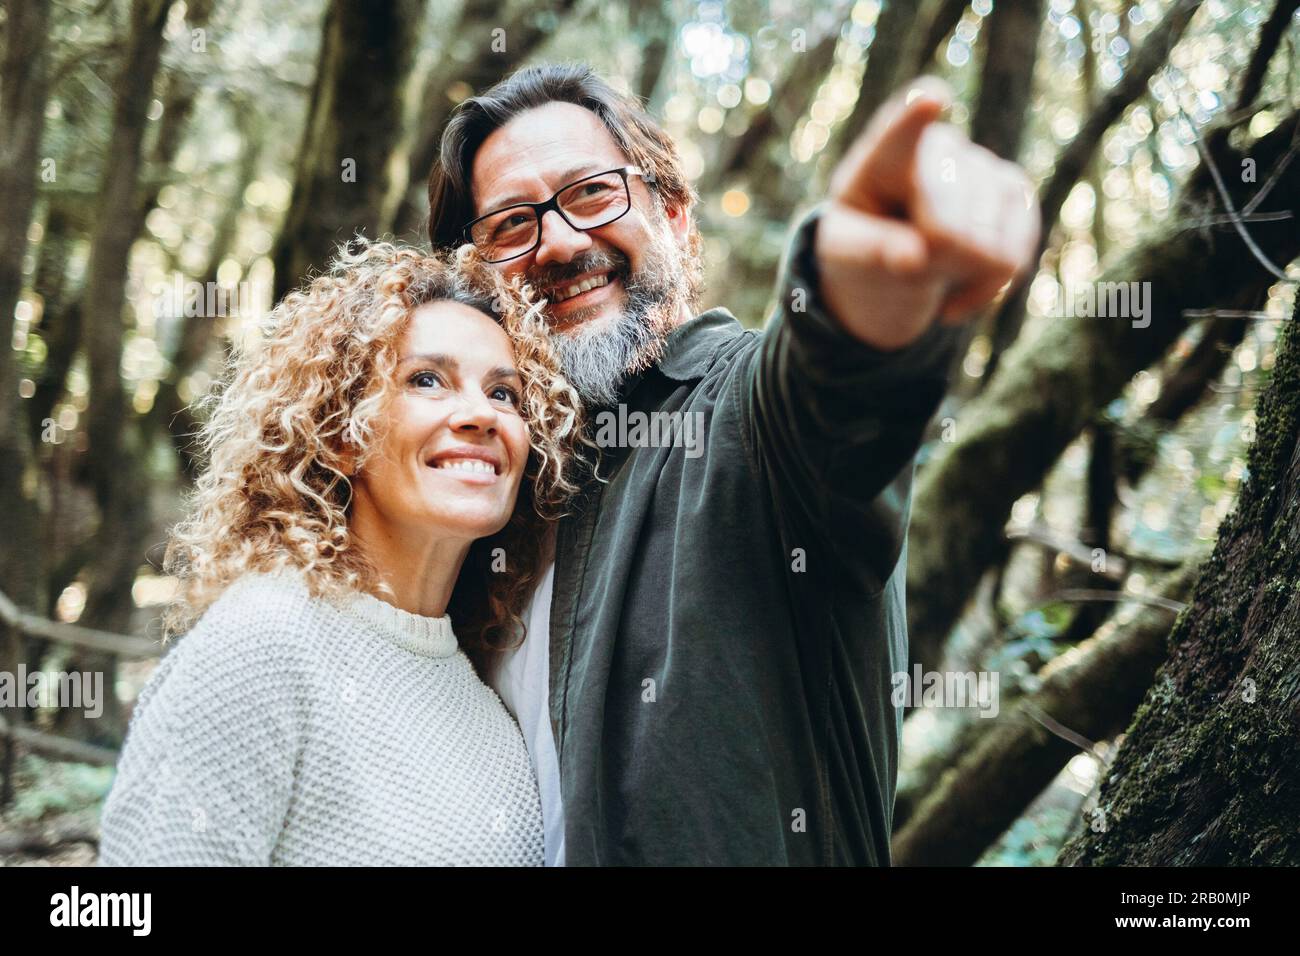 Happy couple of tourist admiring outdoor scenic place in nature forest with green trees and good environment concept. People enjoy together alternative weekend vacation and travel activity outdoors Stock Photo